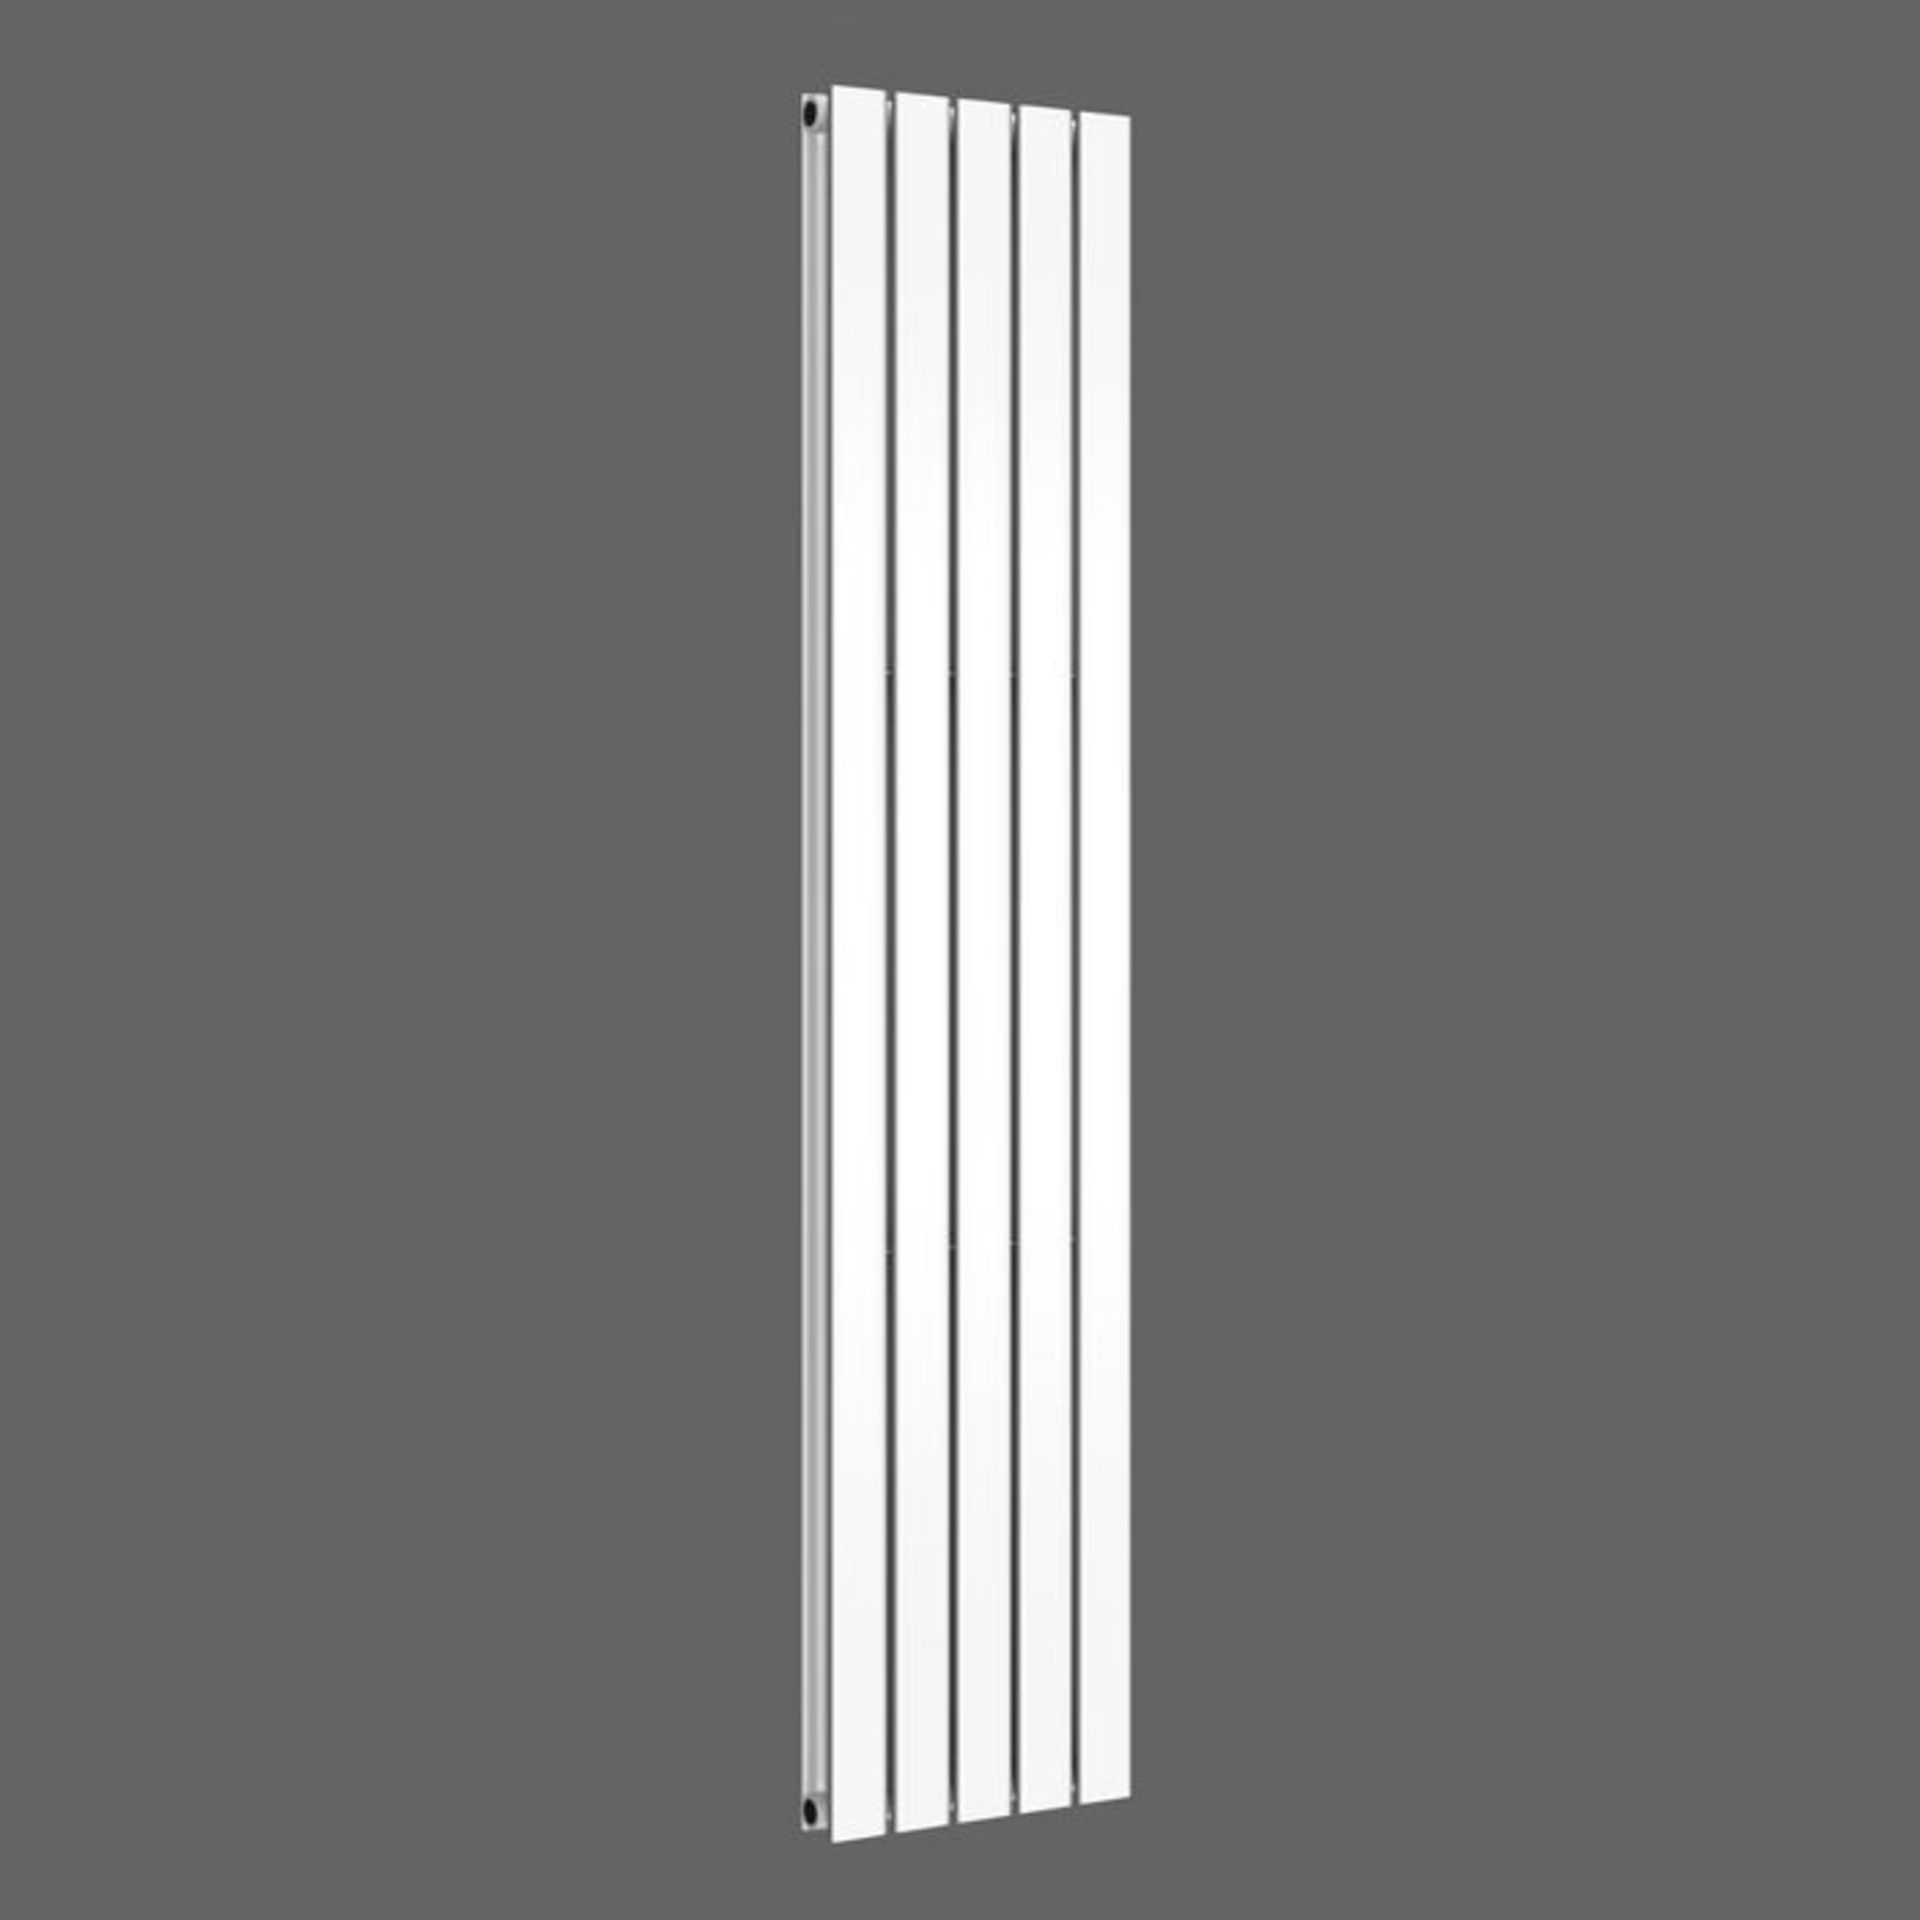 1800x480mm Gloss White Double Flat Panel Vertical Radiator. RRP £499.99. Ultra-modern in desig... - Image 3 of 3